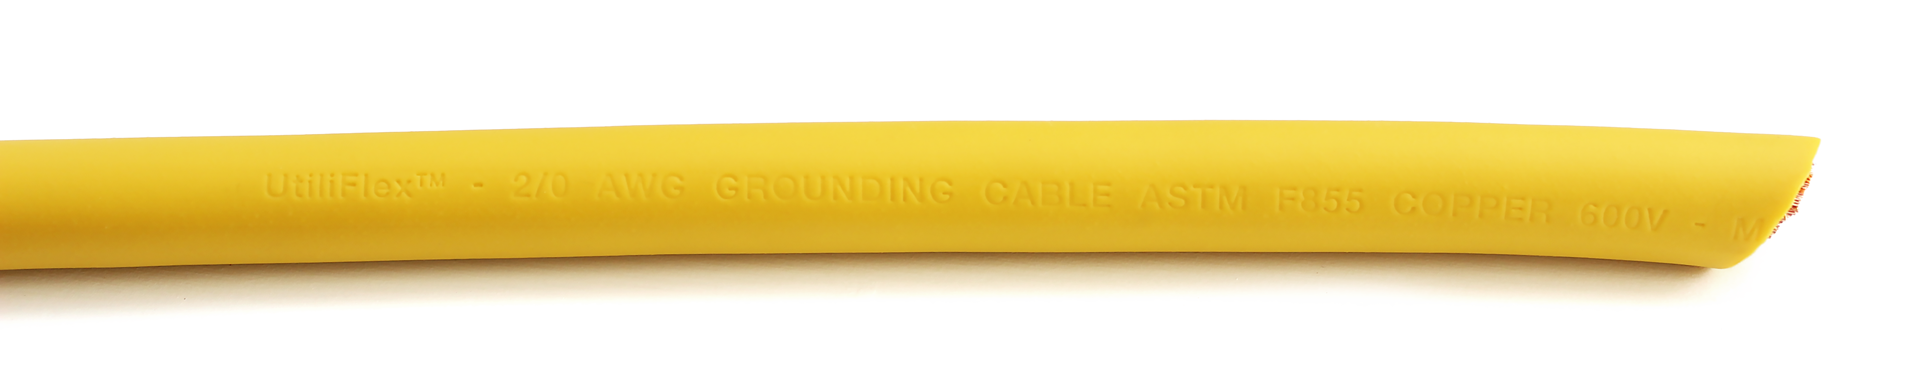 Kalas TPE GROUNDING CABLE with yellow jacket and indent print